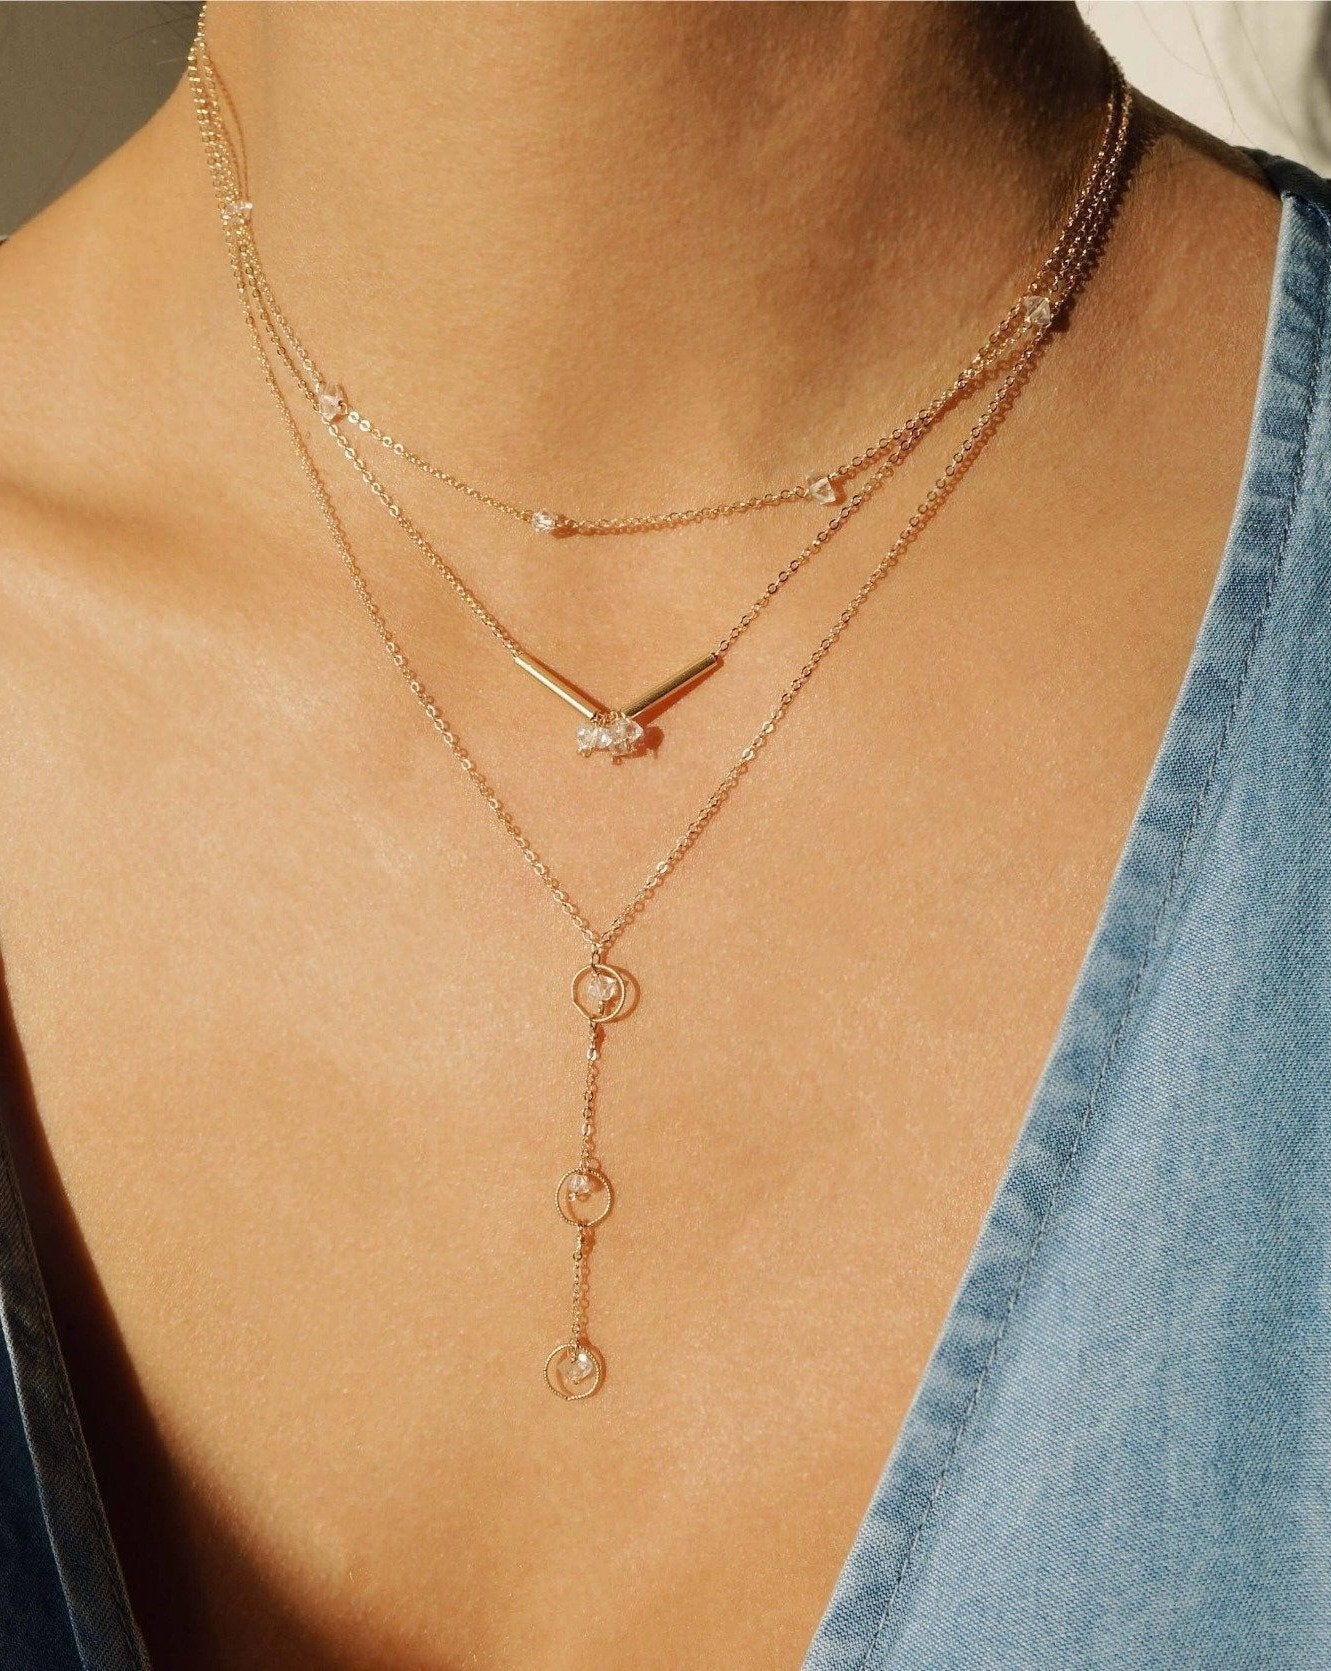 Cinq Herkimer Necklace by KOZAKH. A 16 inch long necklace in 14K Gold Filled, featuring Herkimer Diamonds.